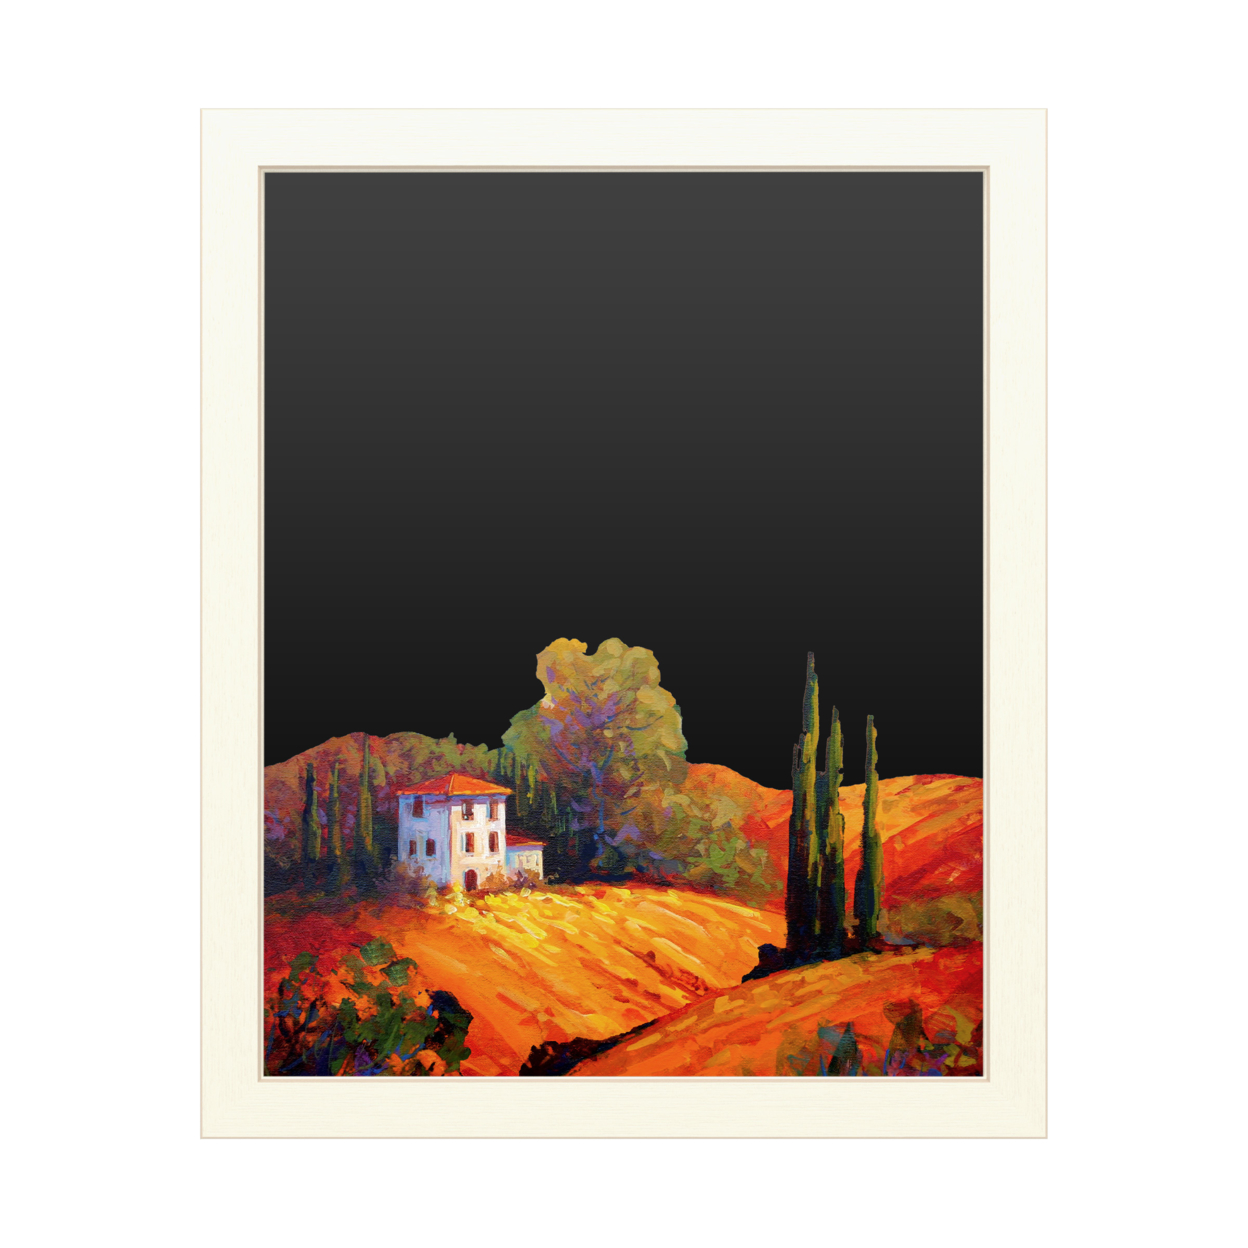 16 X 20 Chalk Board With Printed Artwork - Marion Rose Tuscan Villa Evening White Board - Ready To Hang Chalkboard